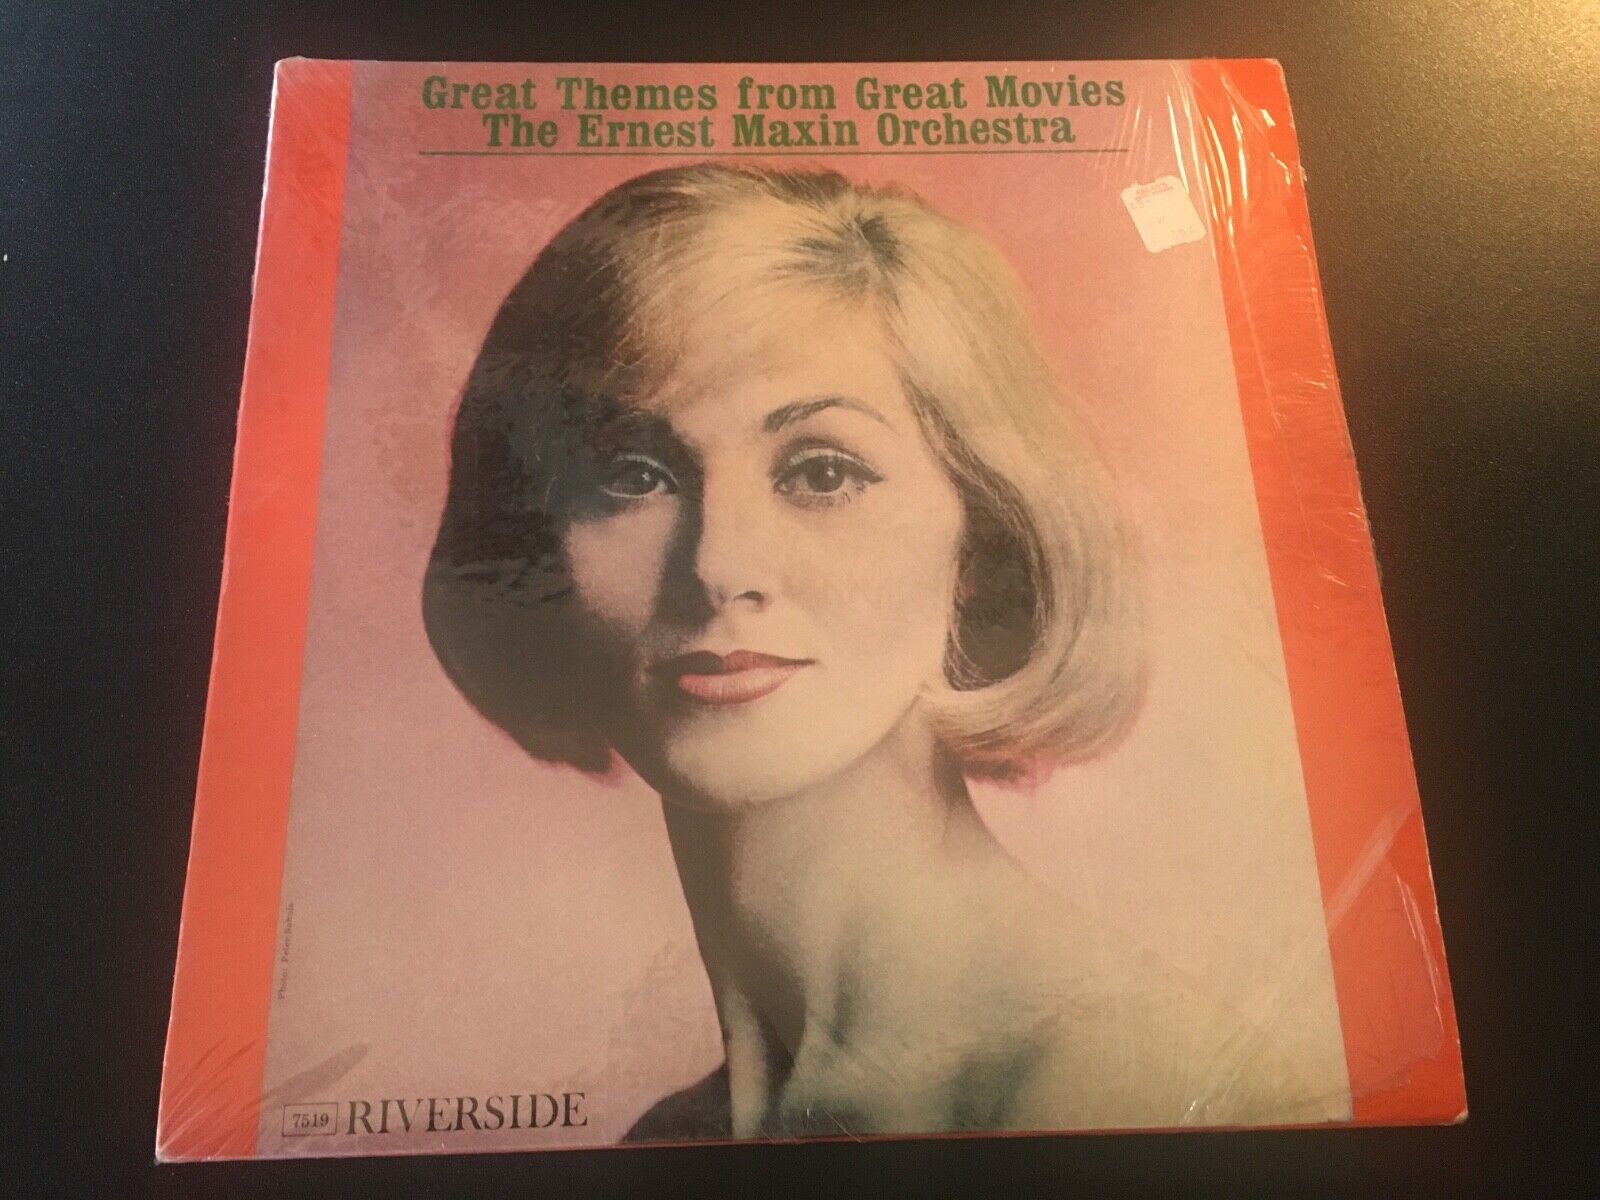 Ernest Maxin Orchestra Great Themes from Movies LP Riverside shrink VG